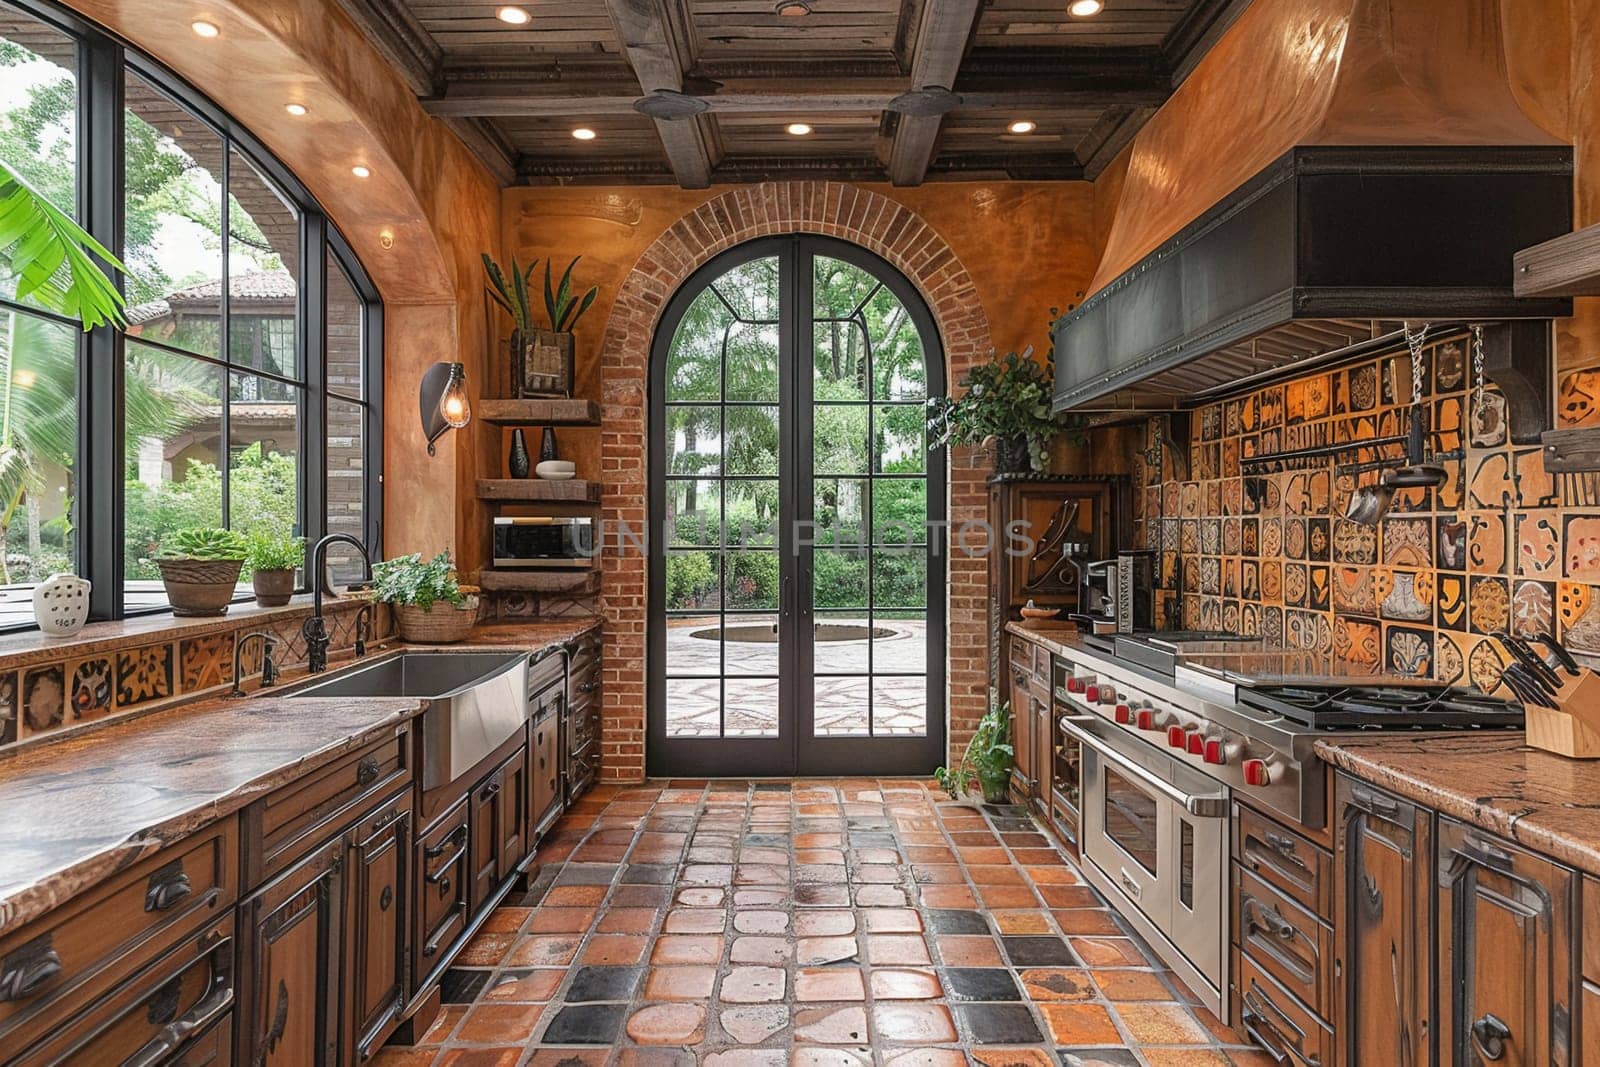 Mediterranean-style kitchen with terracotta tiles and iron accents by Benzoix